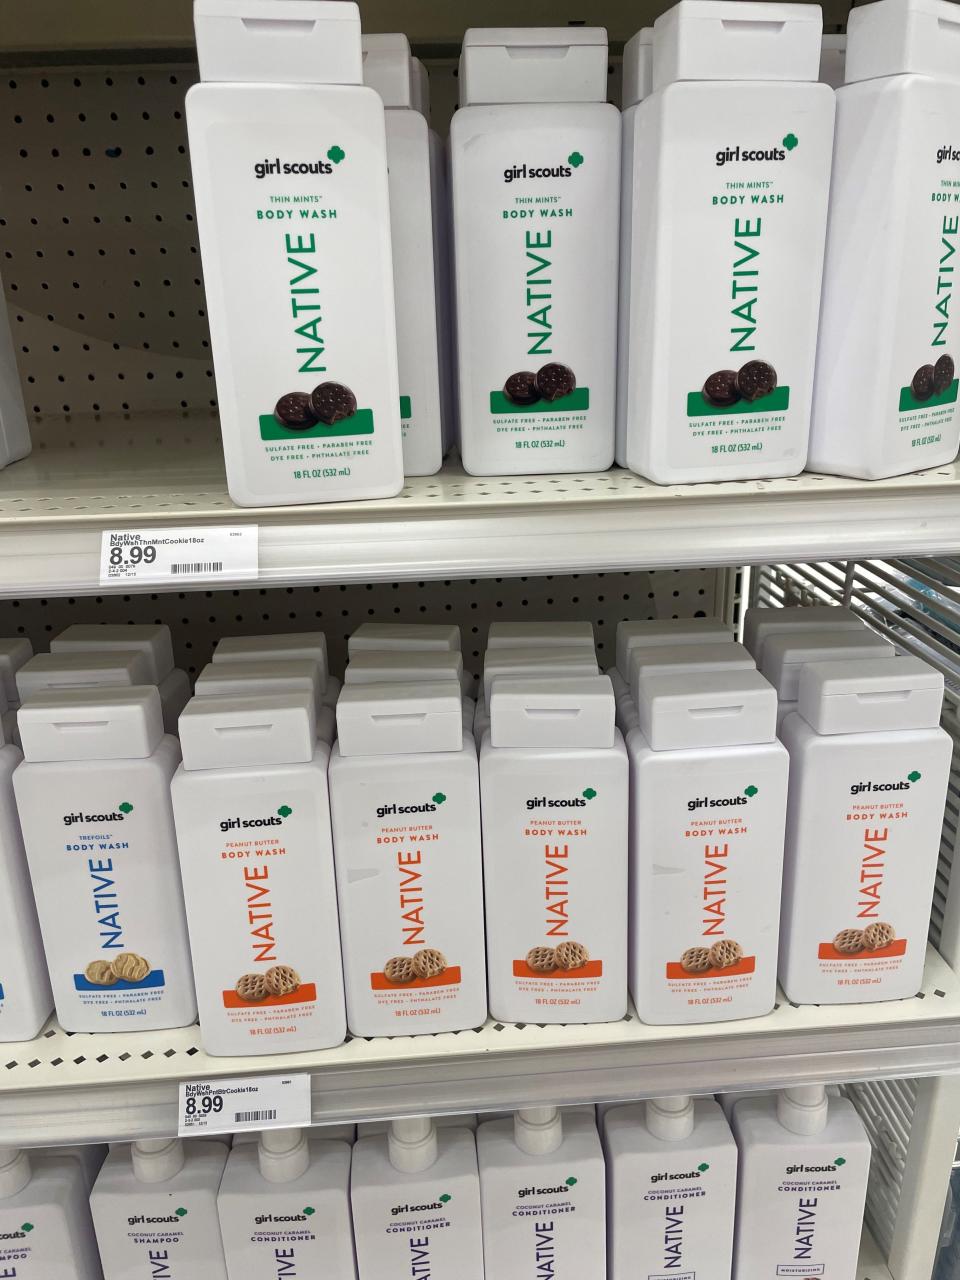 Native, a subsidiary of Cincinnati-based Procter & Gamble, recently rolled out deodorants, body washes and other personal care items online and in Target stores in Girl Scout Cookie scents, including Thin Mint and Peanut Butter.